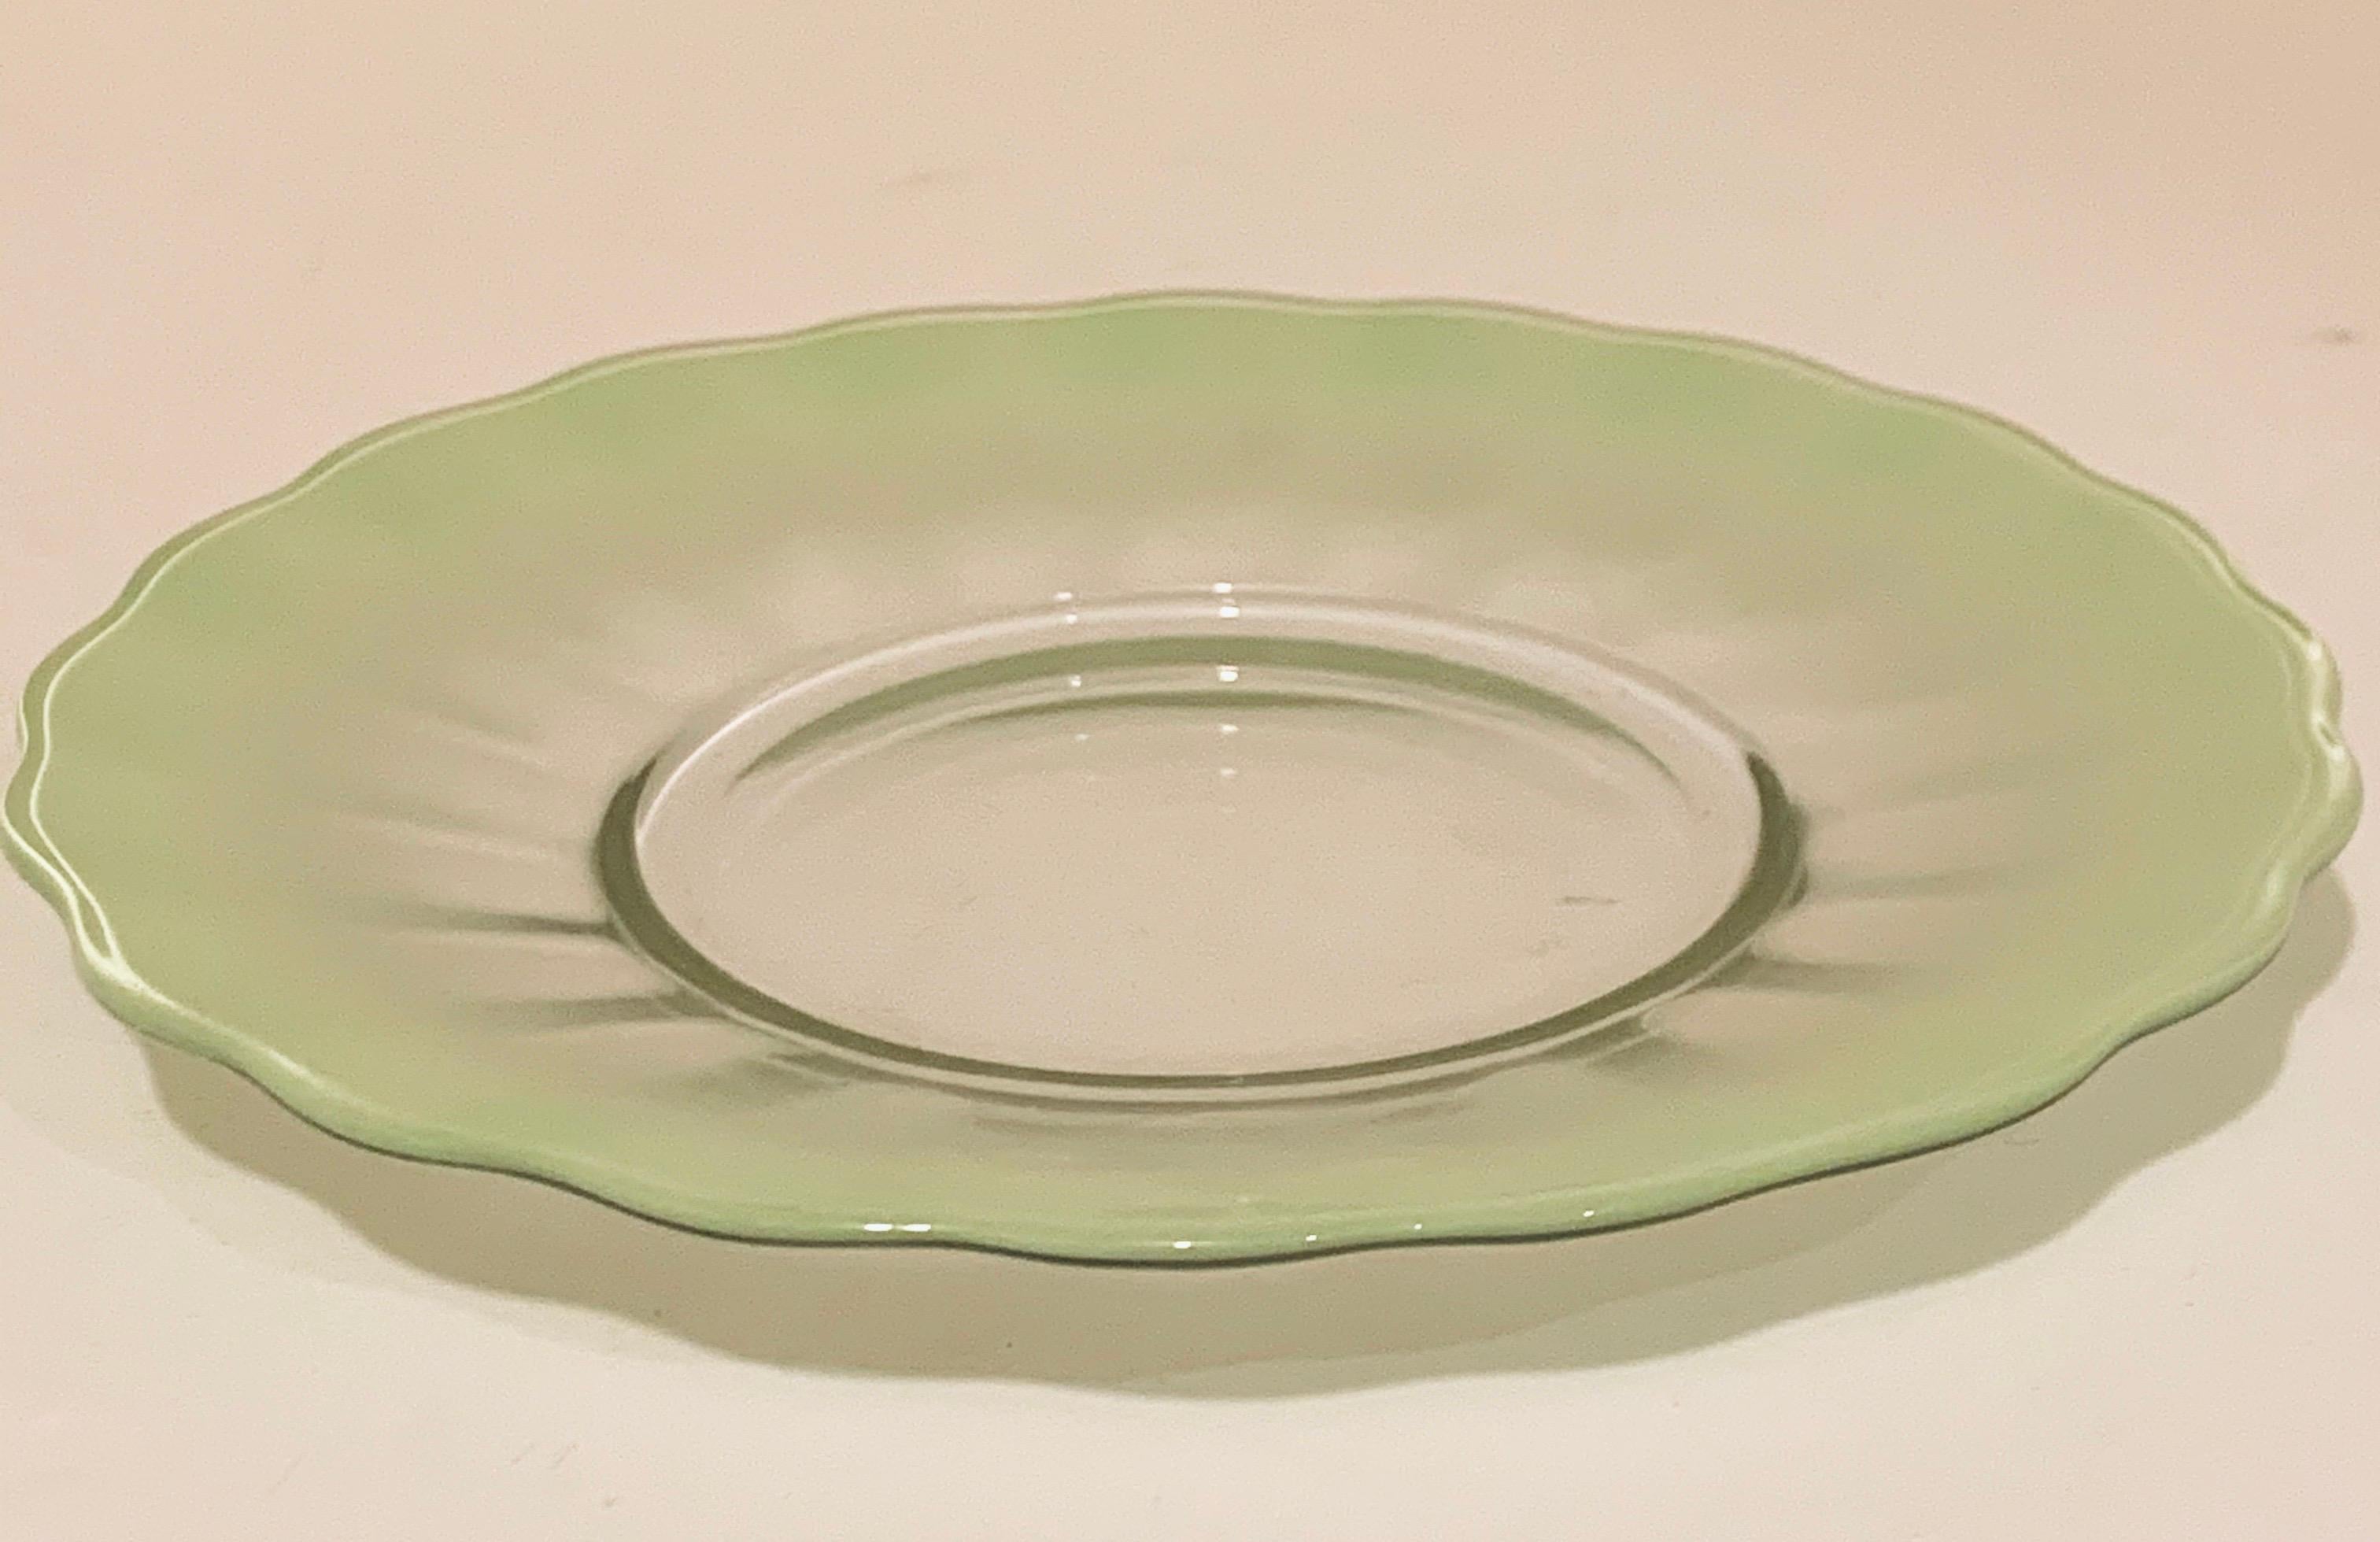 Stunning set of 10 matching art glass translucent plates with scalloped edges. The color is extraordinary.